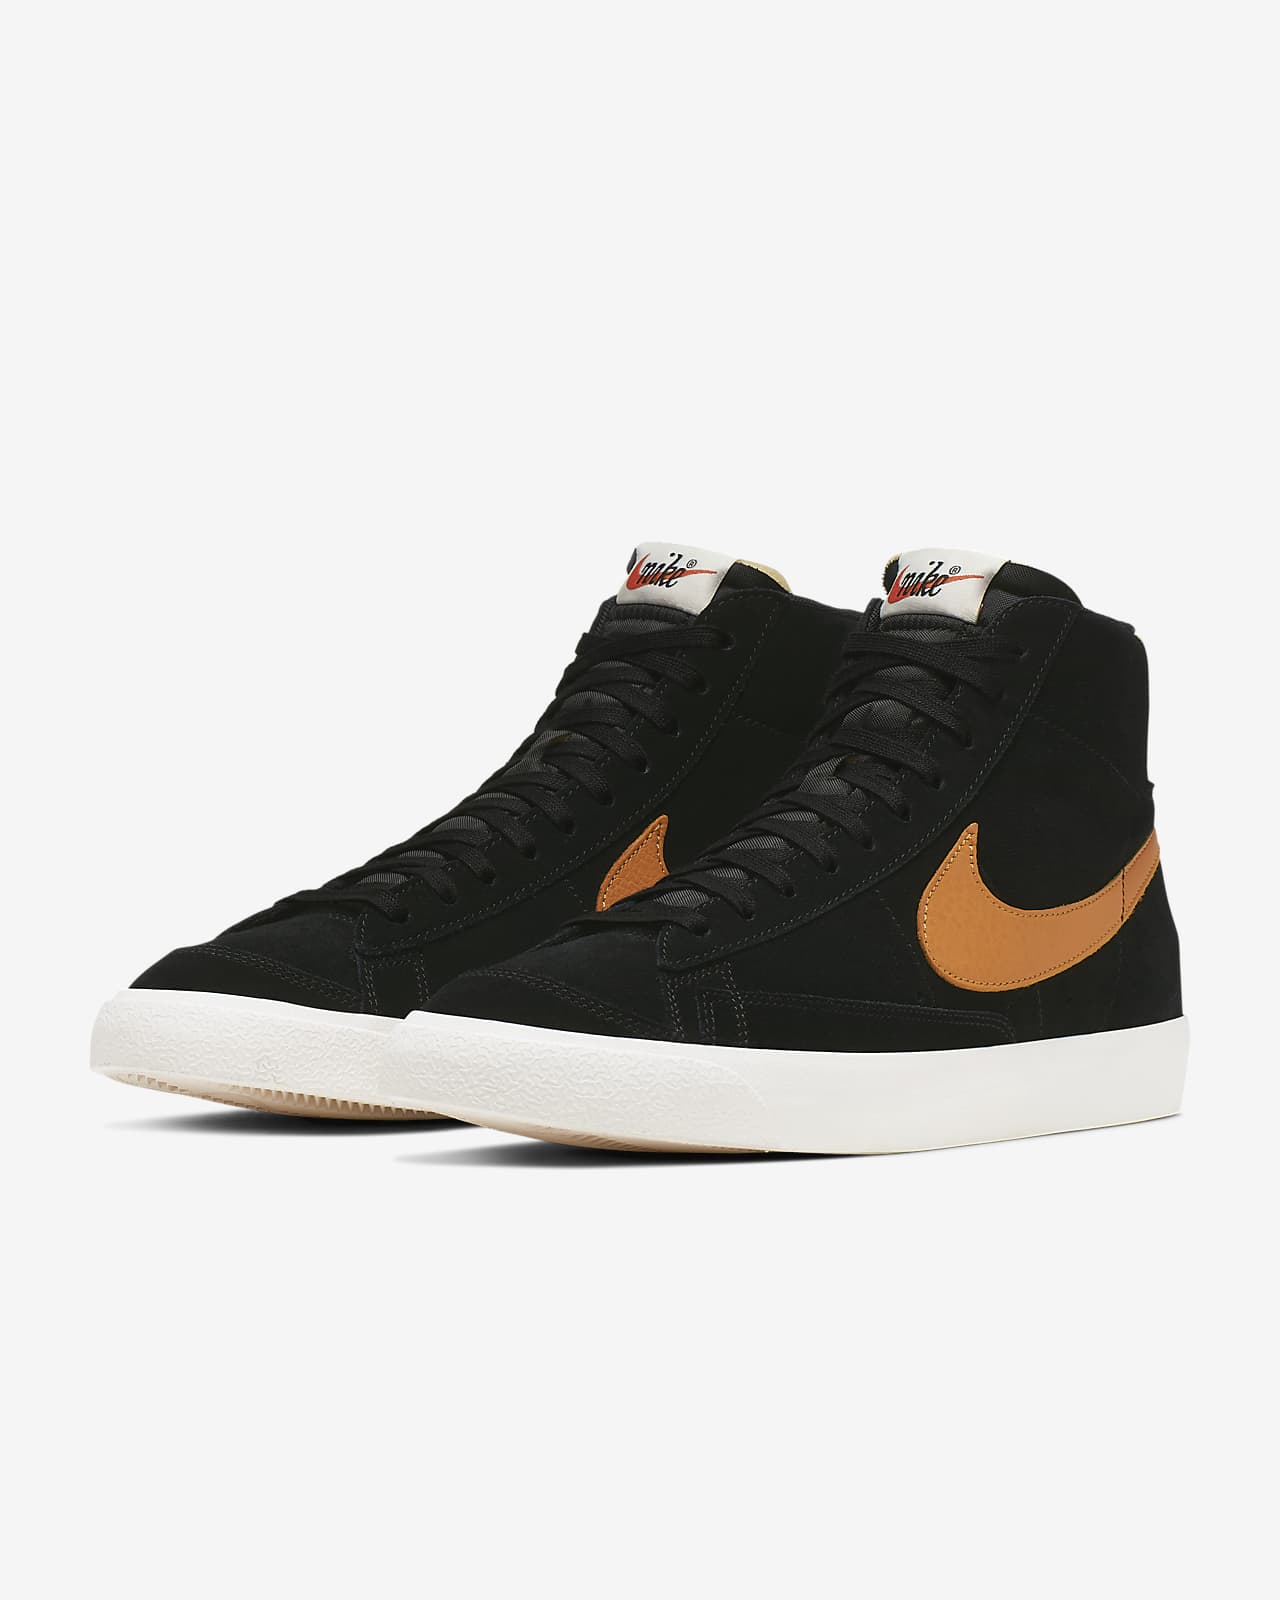 Chaussure Nike Blazer '77 pour Homme